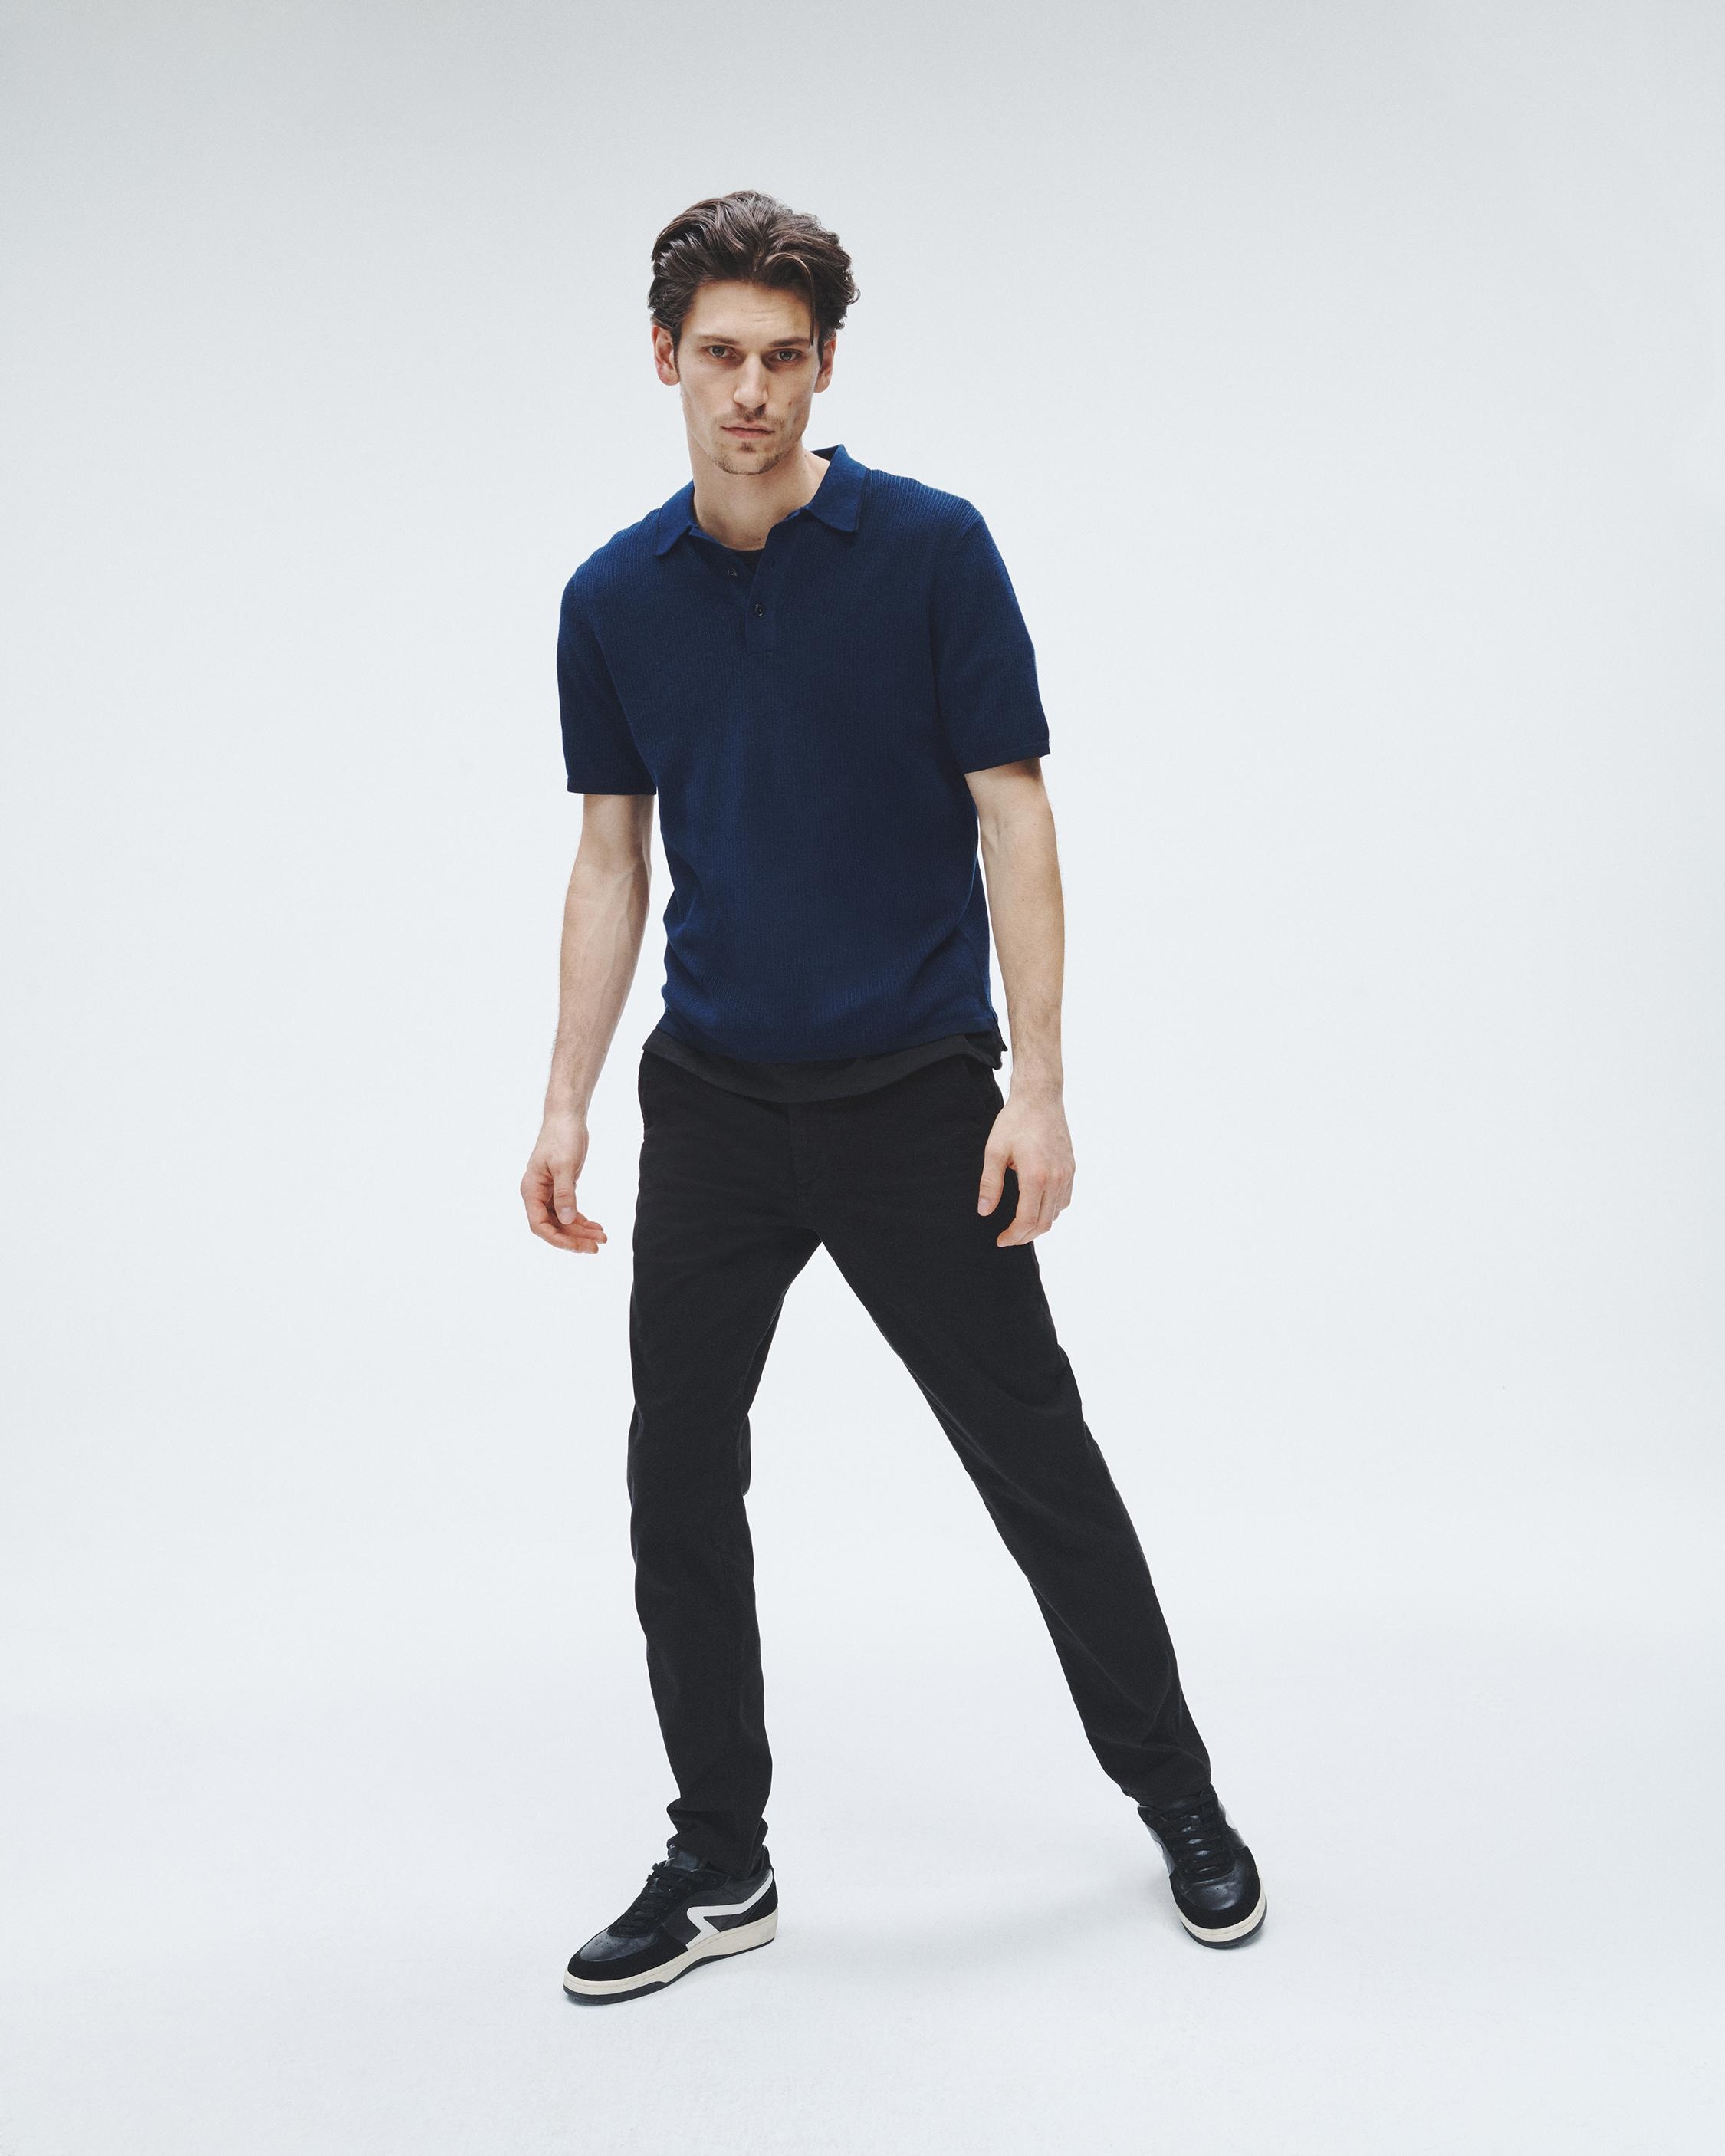 Harvey Polo
Classic Fit - 6